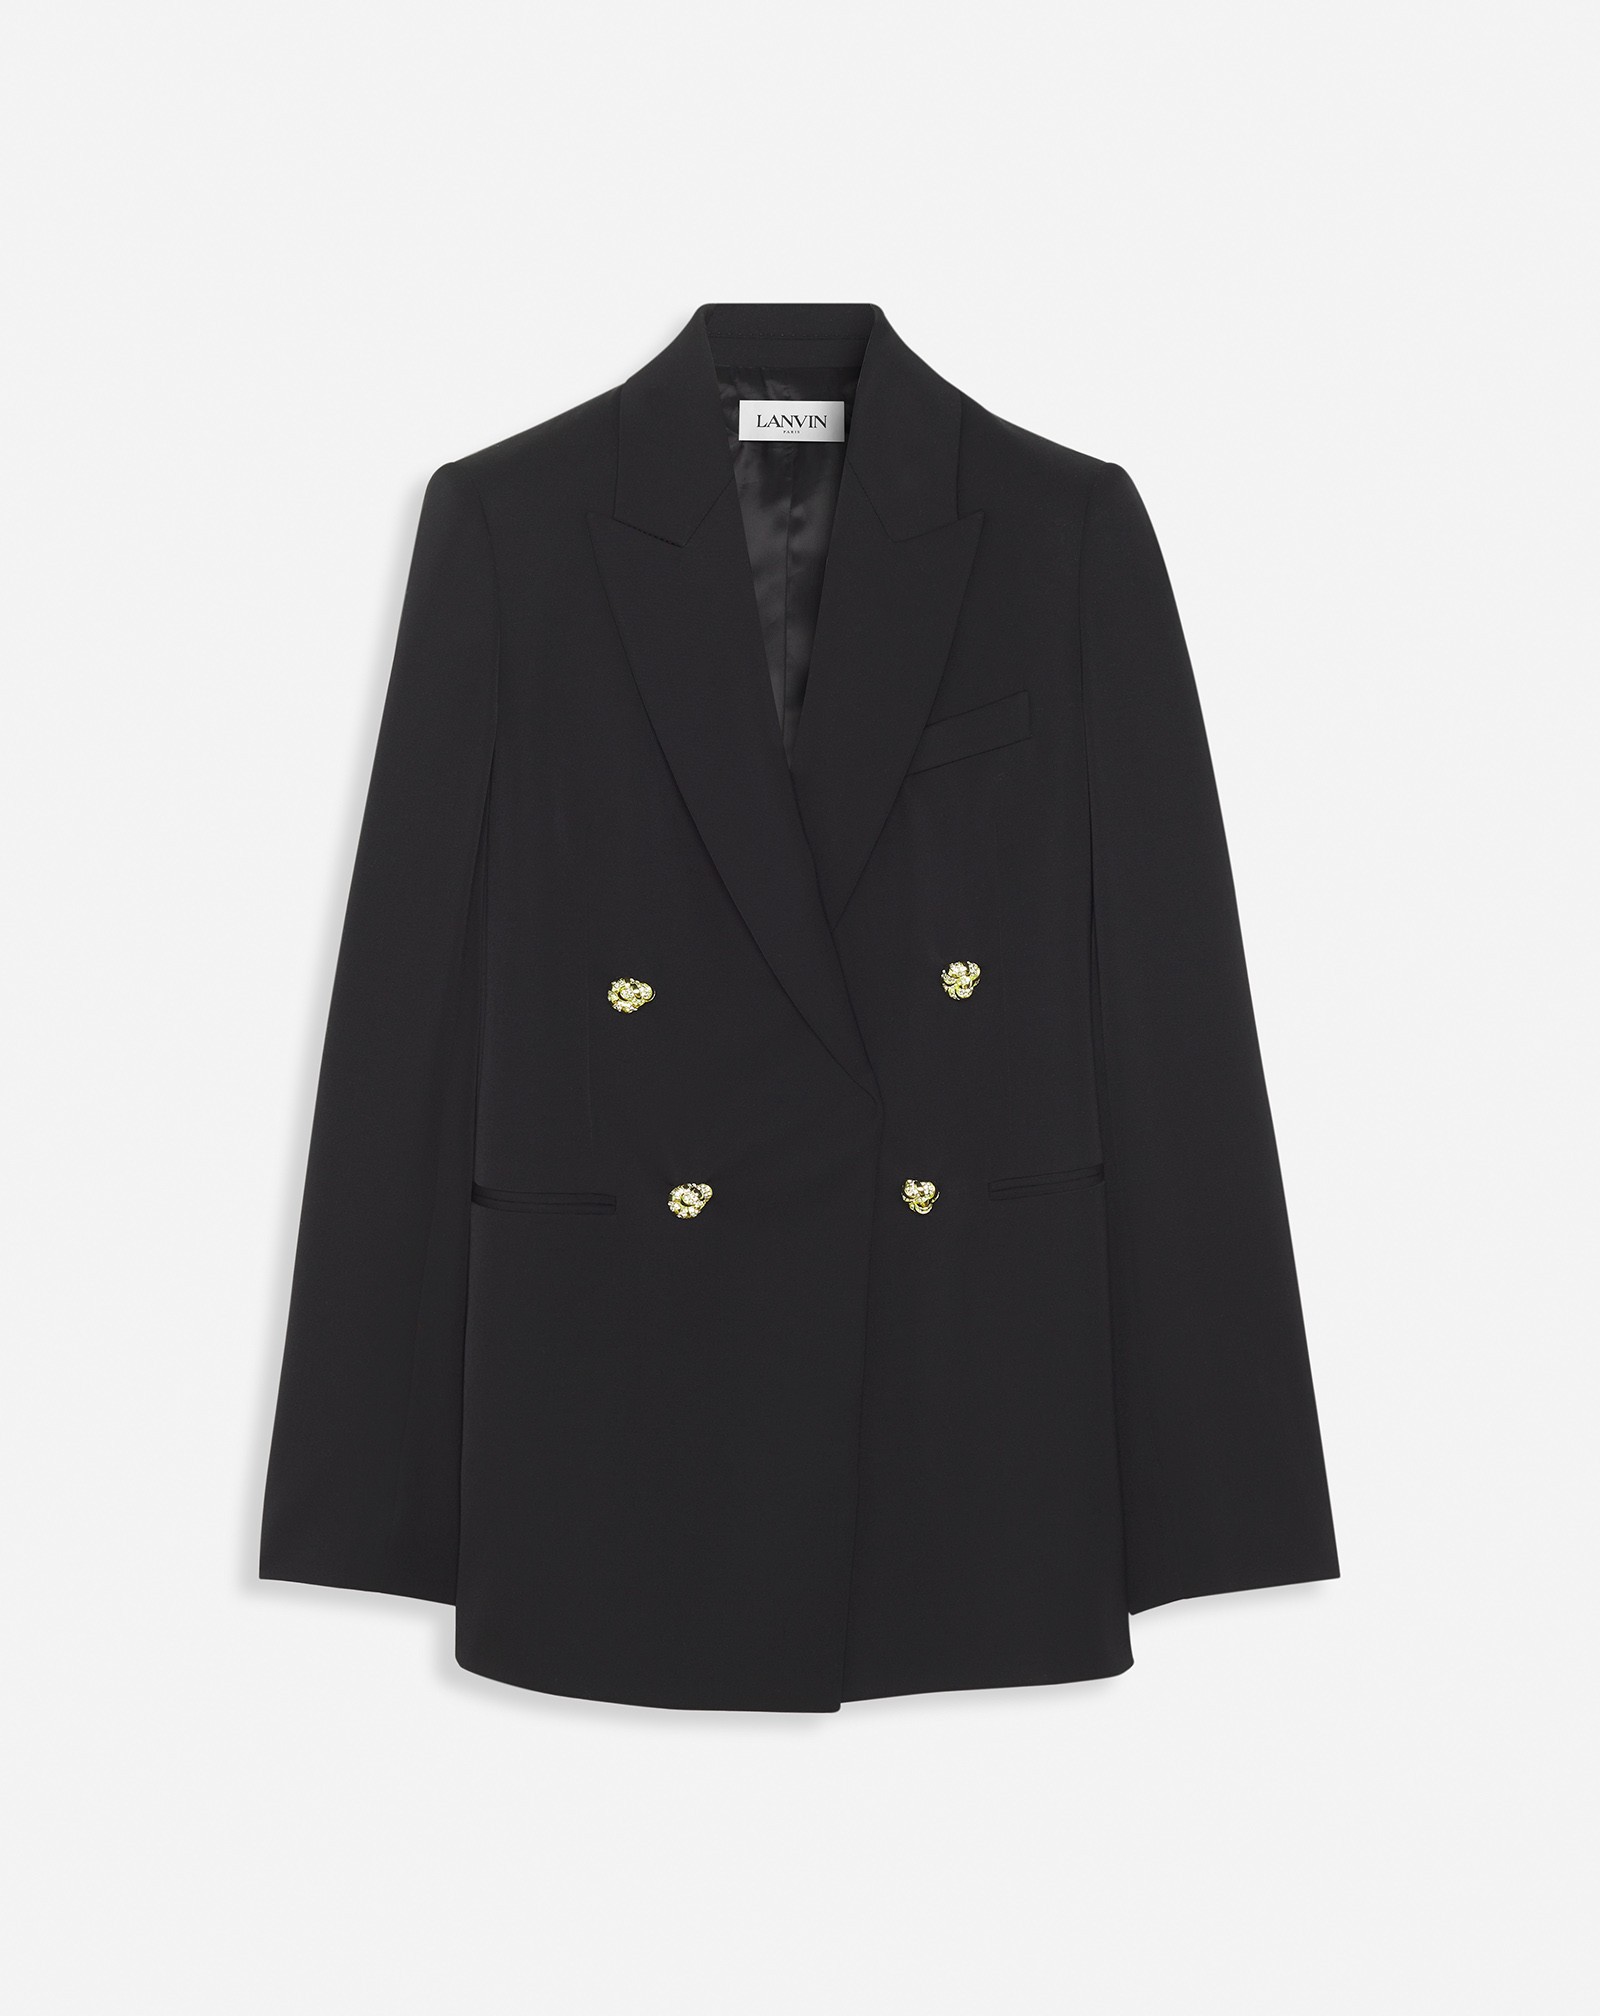 Lanvin Double-breasted Jacket For Women In Black